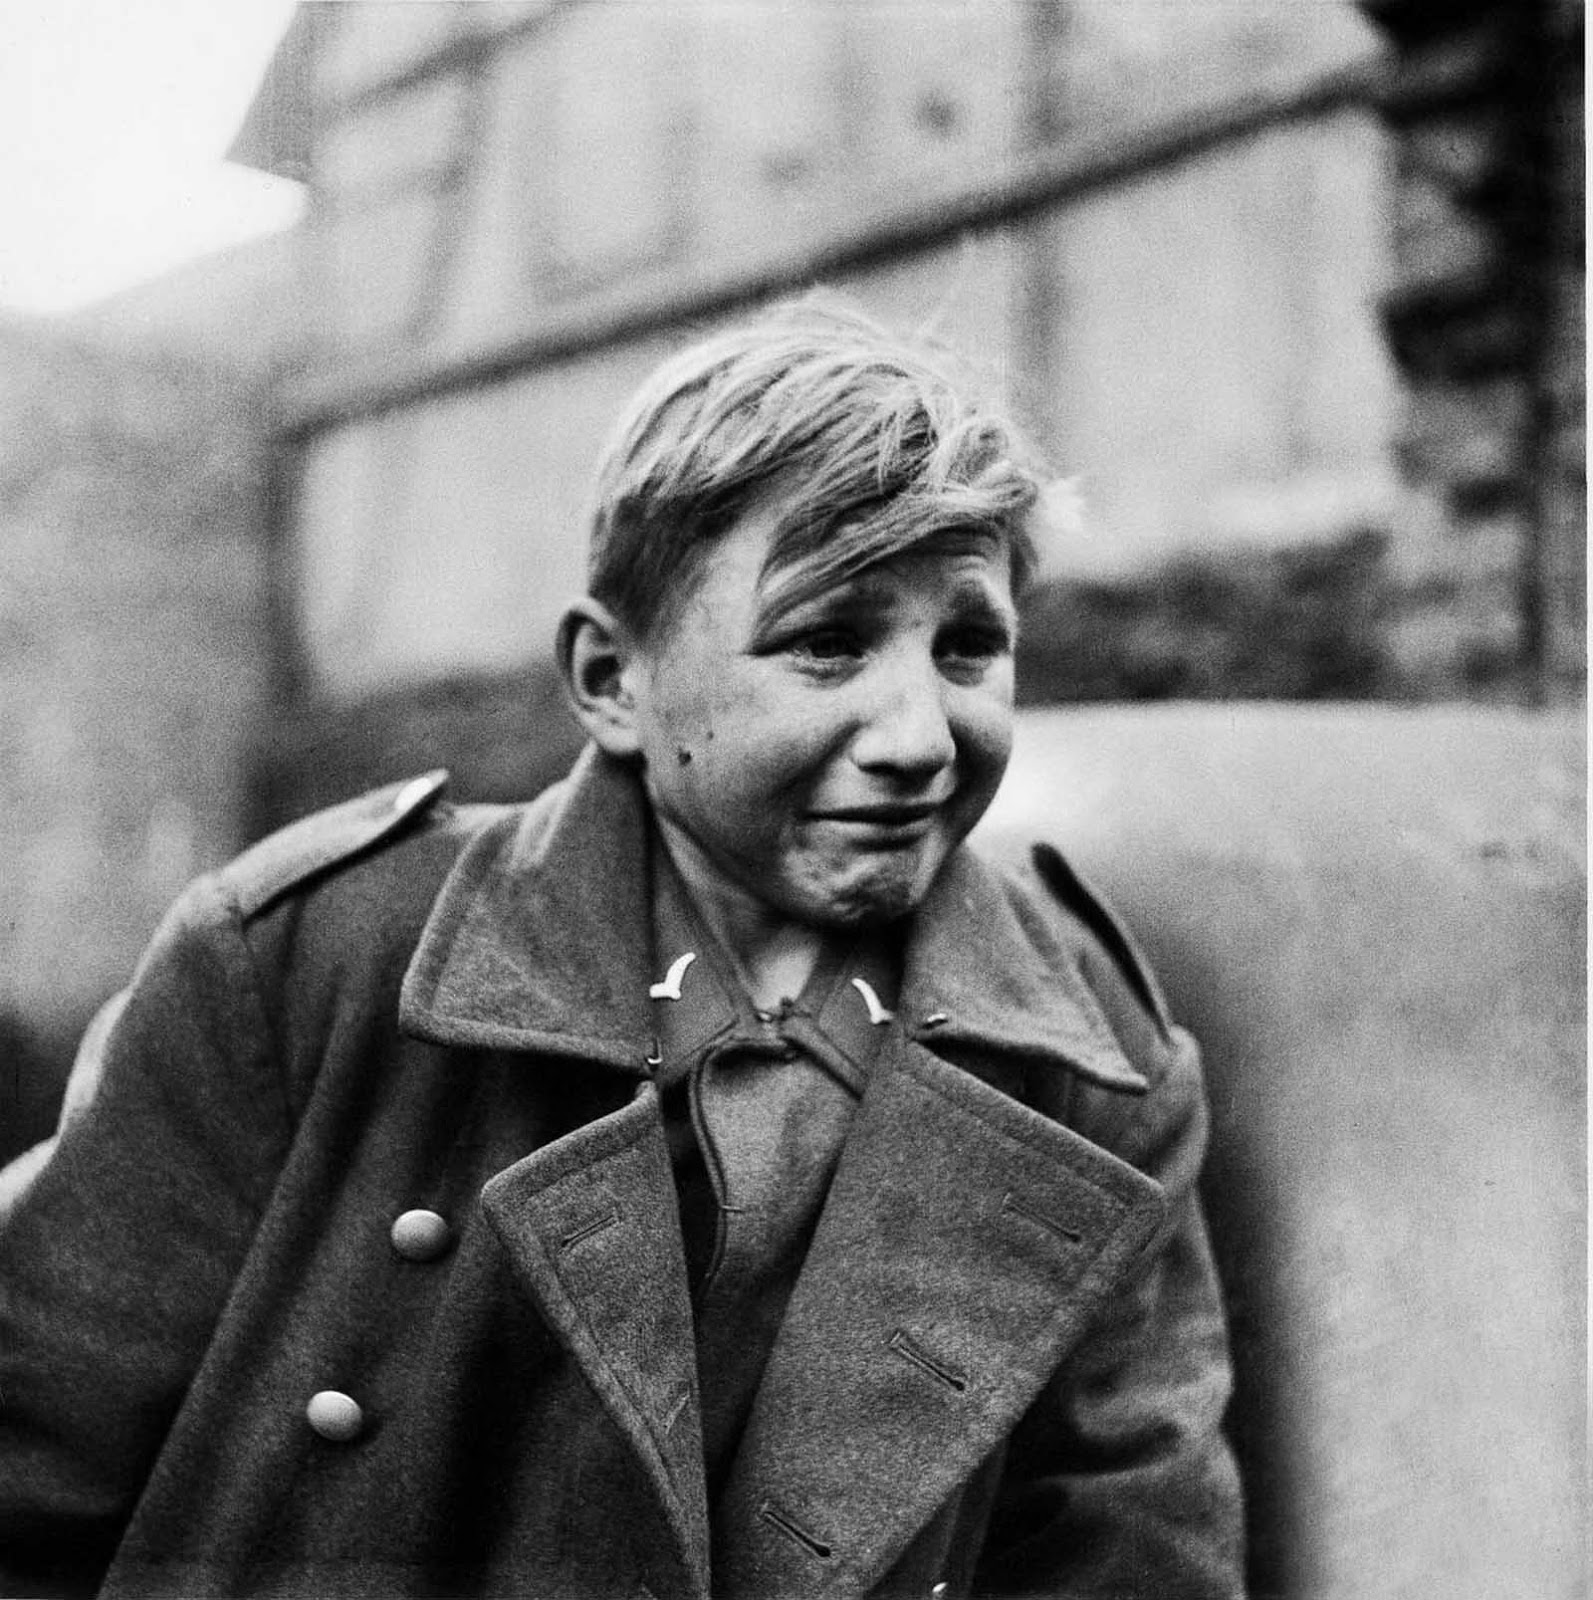 A fifteen year old German soldier, Hans-Georg Henke, cries being captured by the US 9th Army in Germany on April 3, 1945